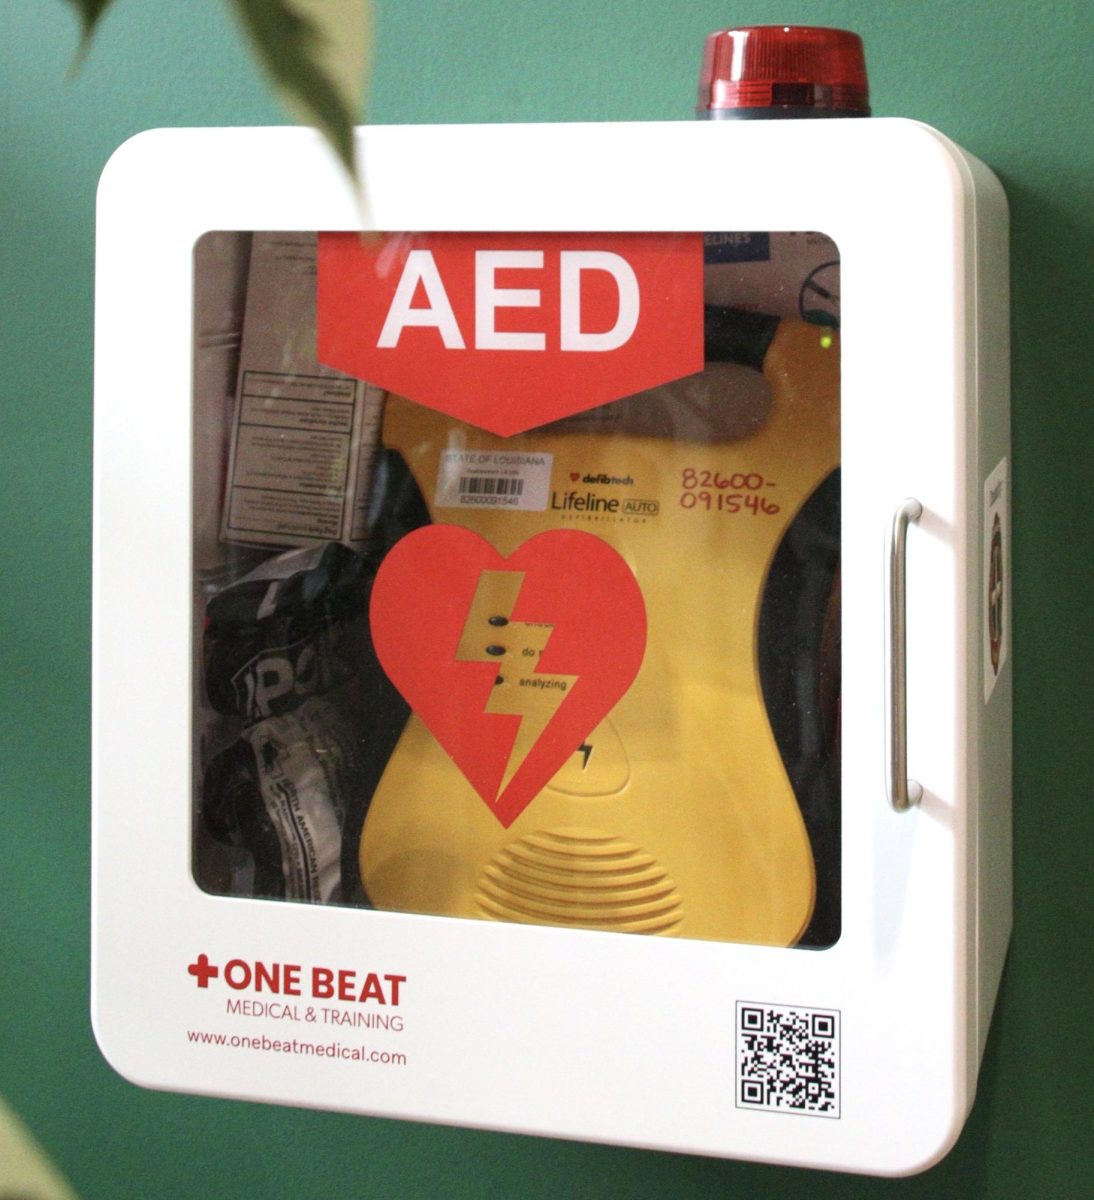 An+image+of+an+AED+located+in+the+Student+Union+across+from+the+elevators.+